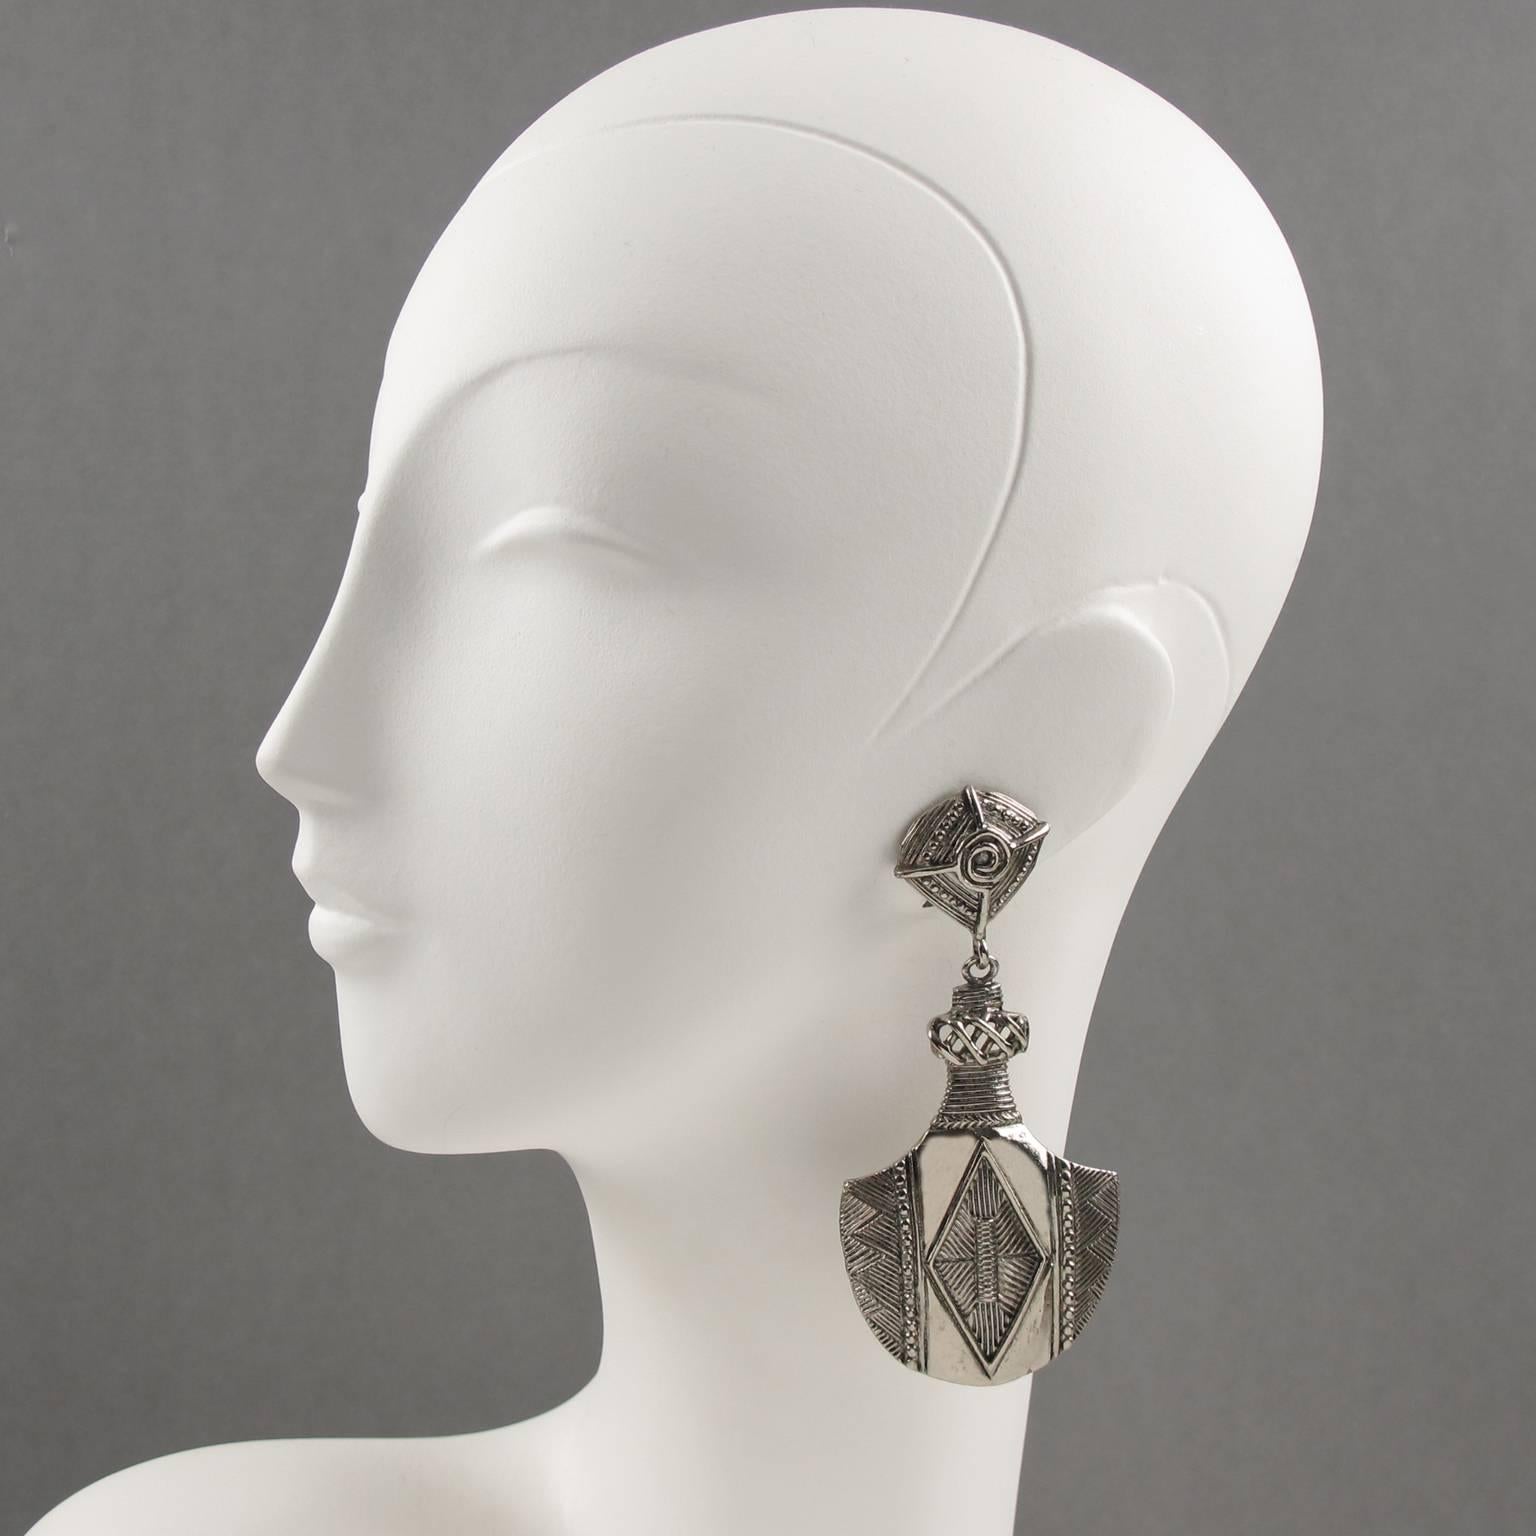 Vintage French designer JEAN LOUIS SCHERRER Paris signed clip on earrings. Rare silvered metal oversized dangling chandelier shape with African Tribal inspired carving. Signed underside with tag: 